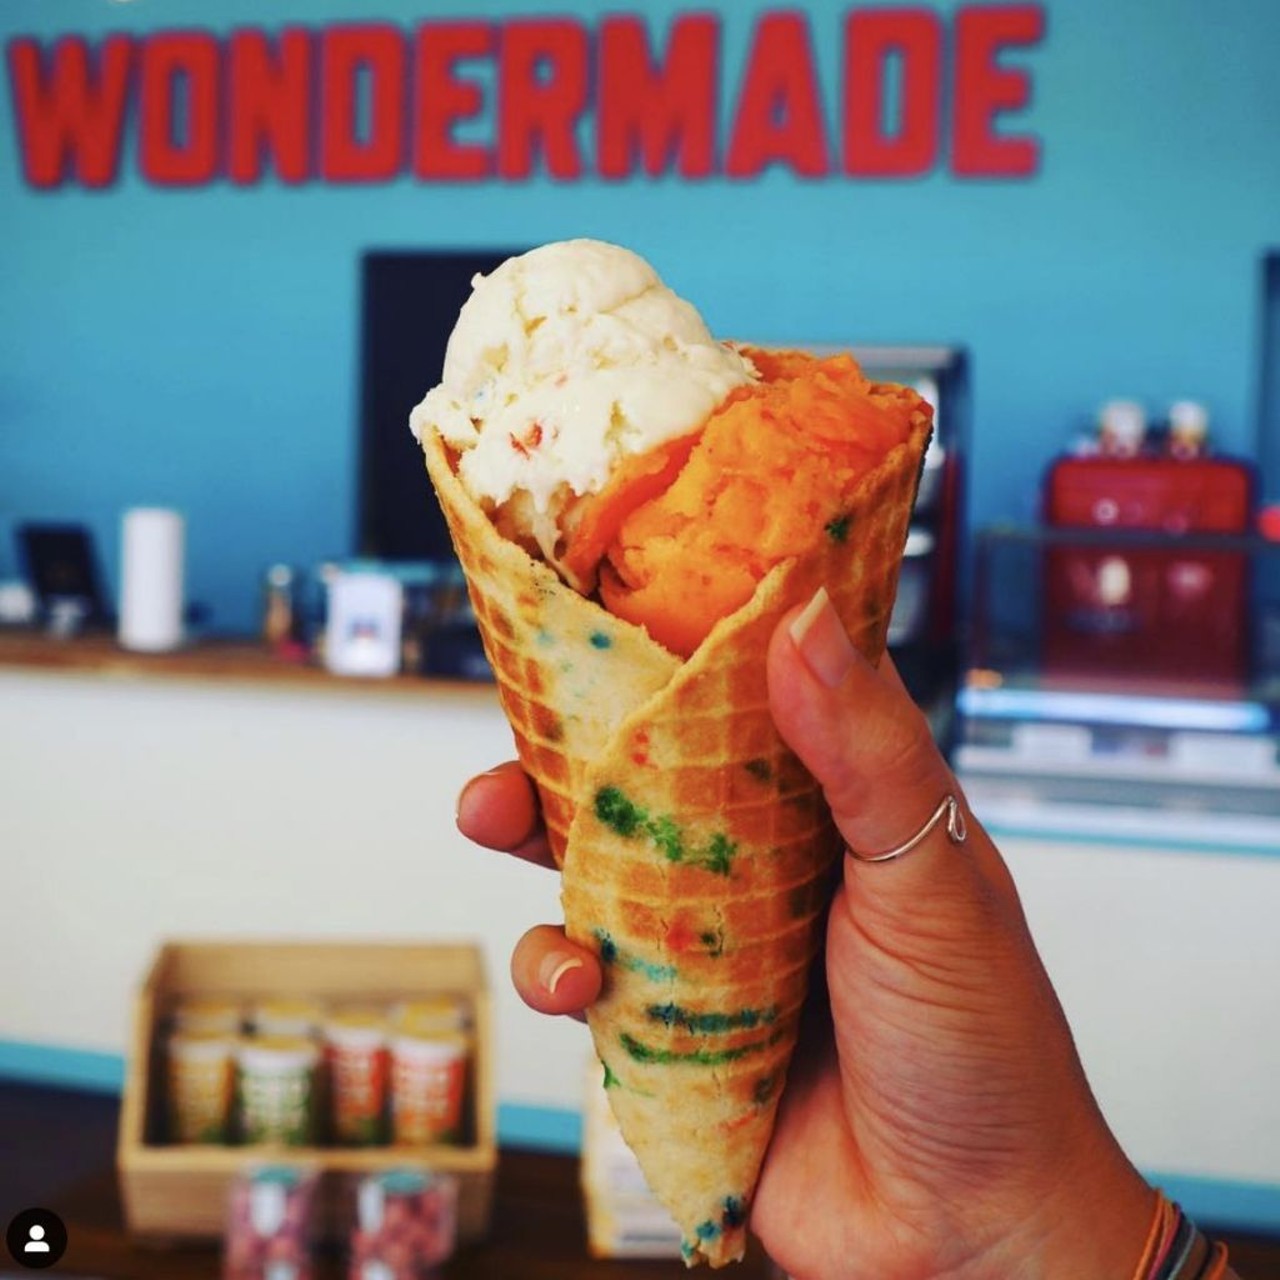 Wondermade Caf&eacute;
214 E. First St., Sanford, 407-205-9569
Wondermade Cafe sells unusual and handcrafted ice cream flavors as well as delicious marshmallows with literally everything. If you want to go to a fun and yummy place, this is for you. Let the sugar rush begin.
Photo via sibilaman/ Instagram